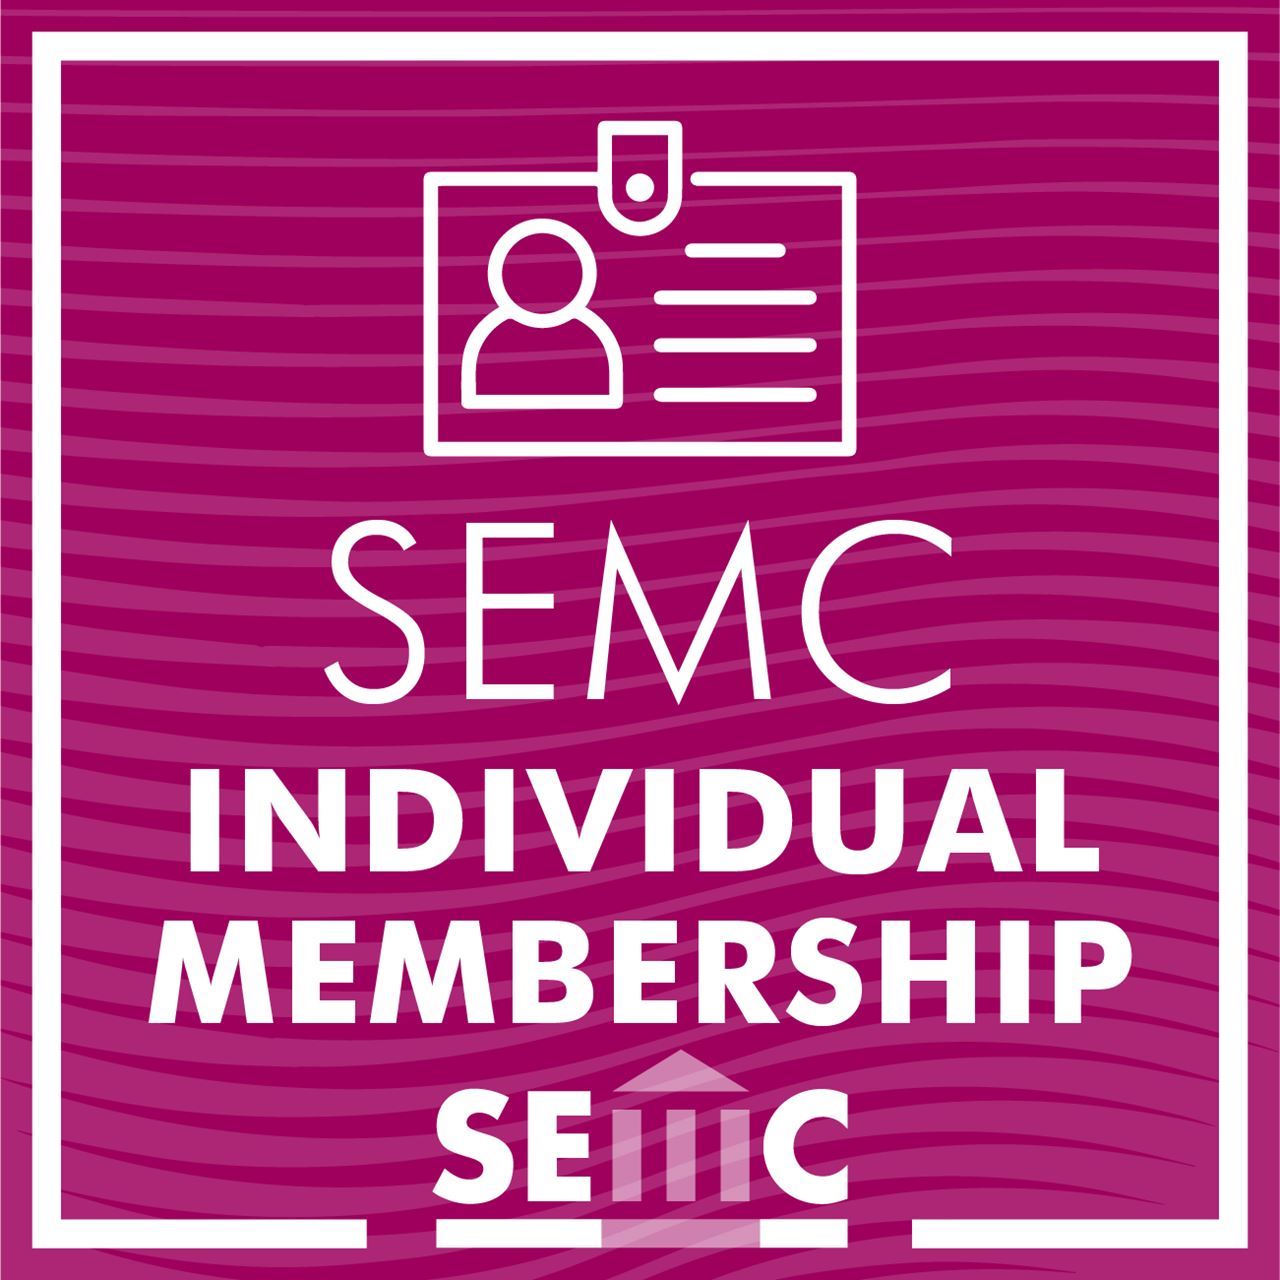 A dark pink striped background, with image of a name badge and the words “SEMC Individual Membership” centered. The SEMC logo is also at the bottom